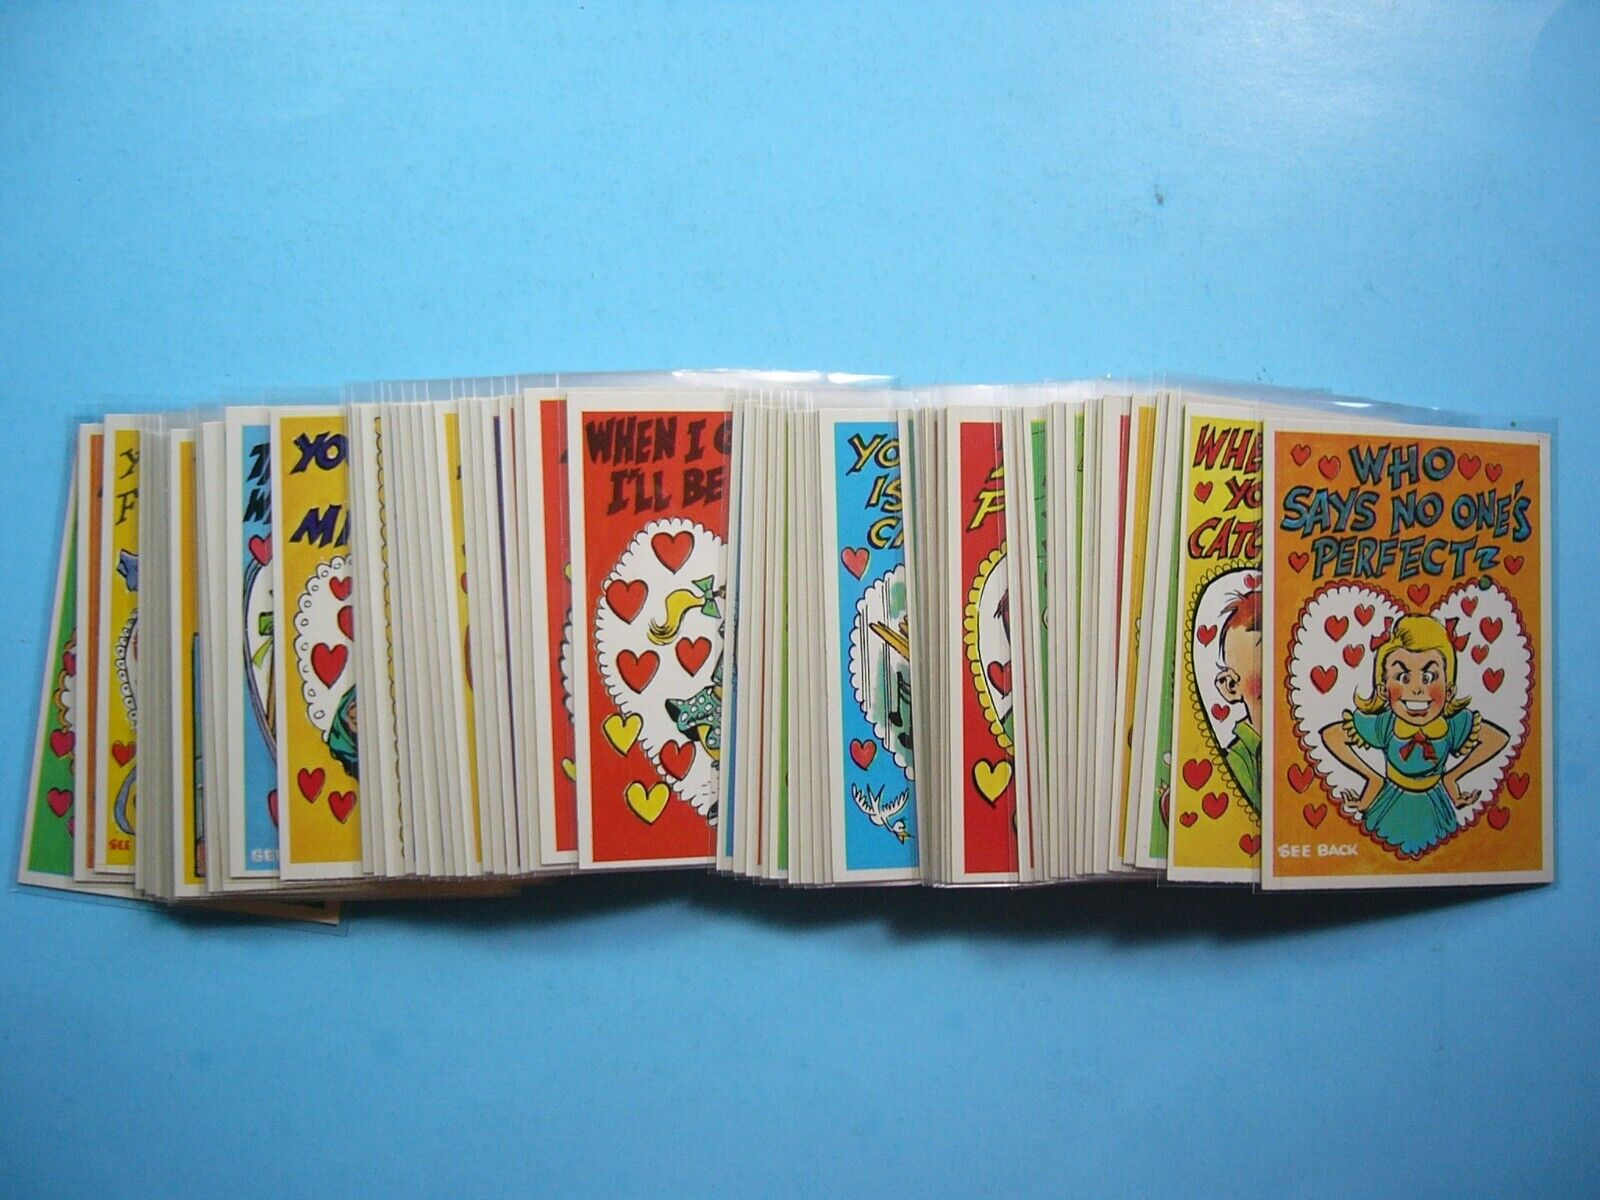 1960 TOPPS CHEWING GUM FUNNY VALENTINE COLLECTOR CARD FULL SET MINT SHARP '60